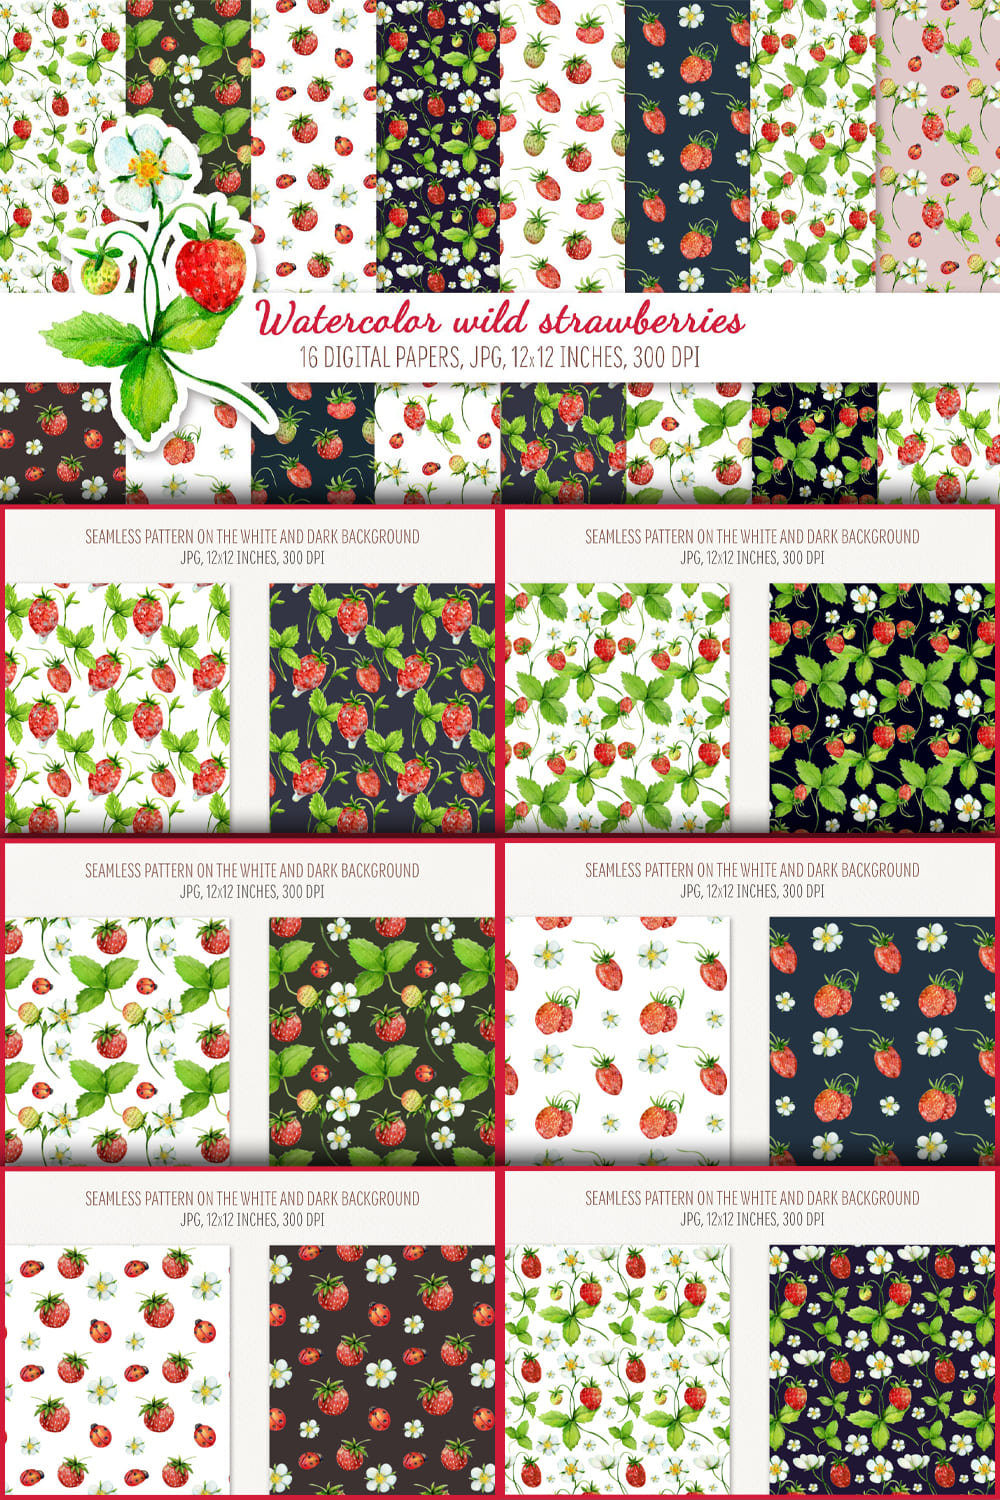 Strawberries digital paper pack on the white and black backgrounds.